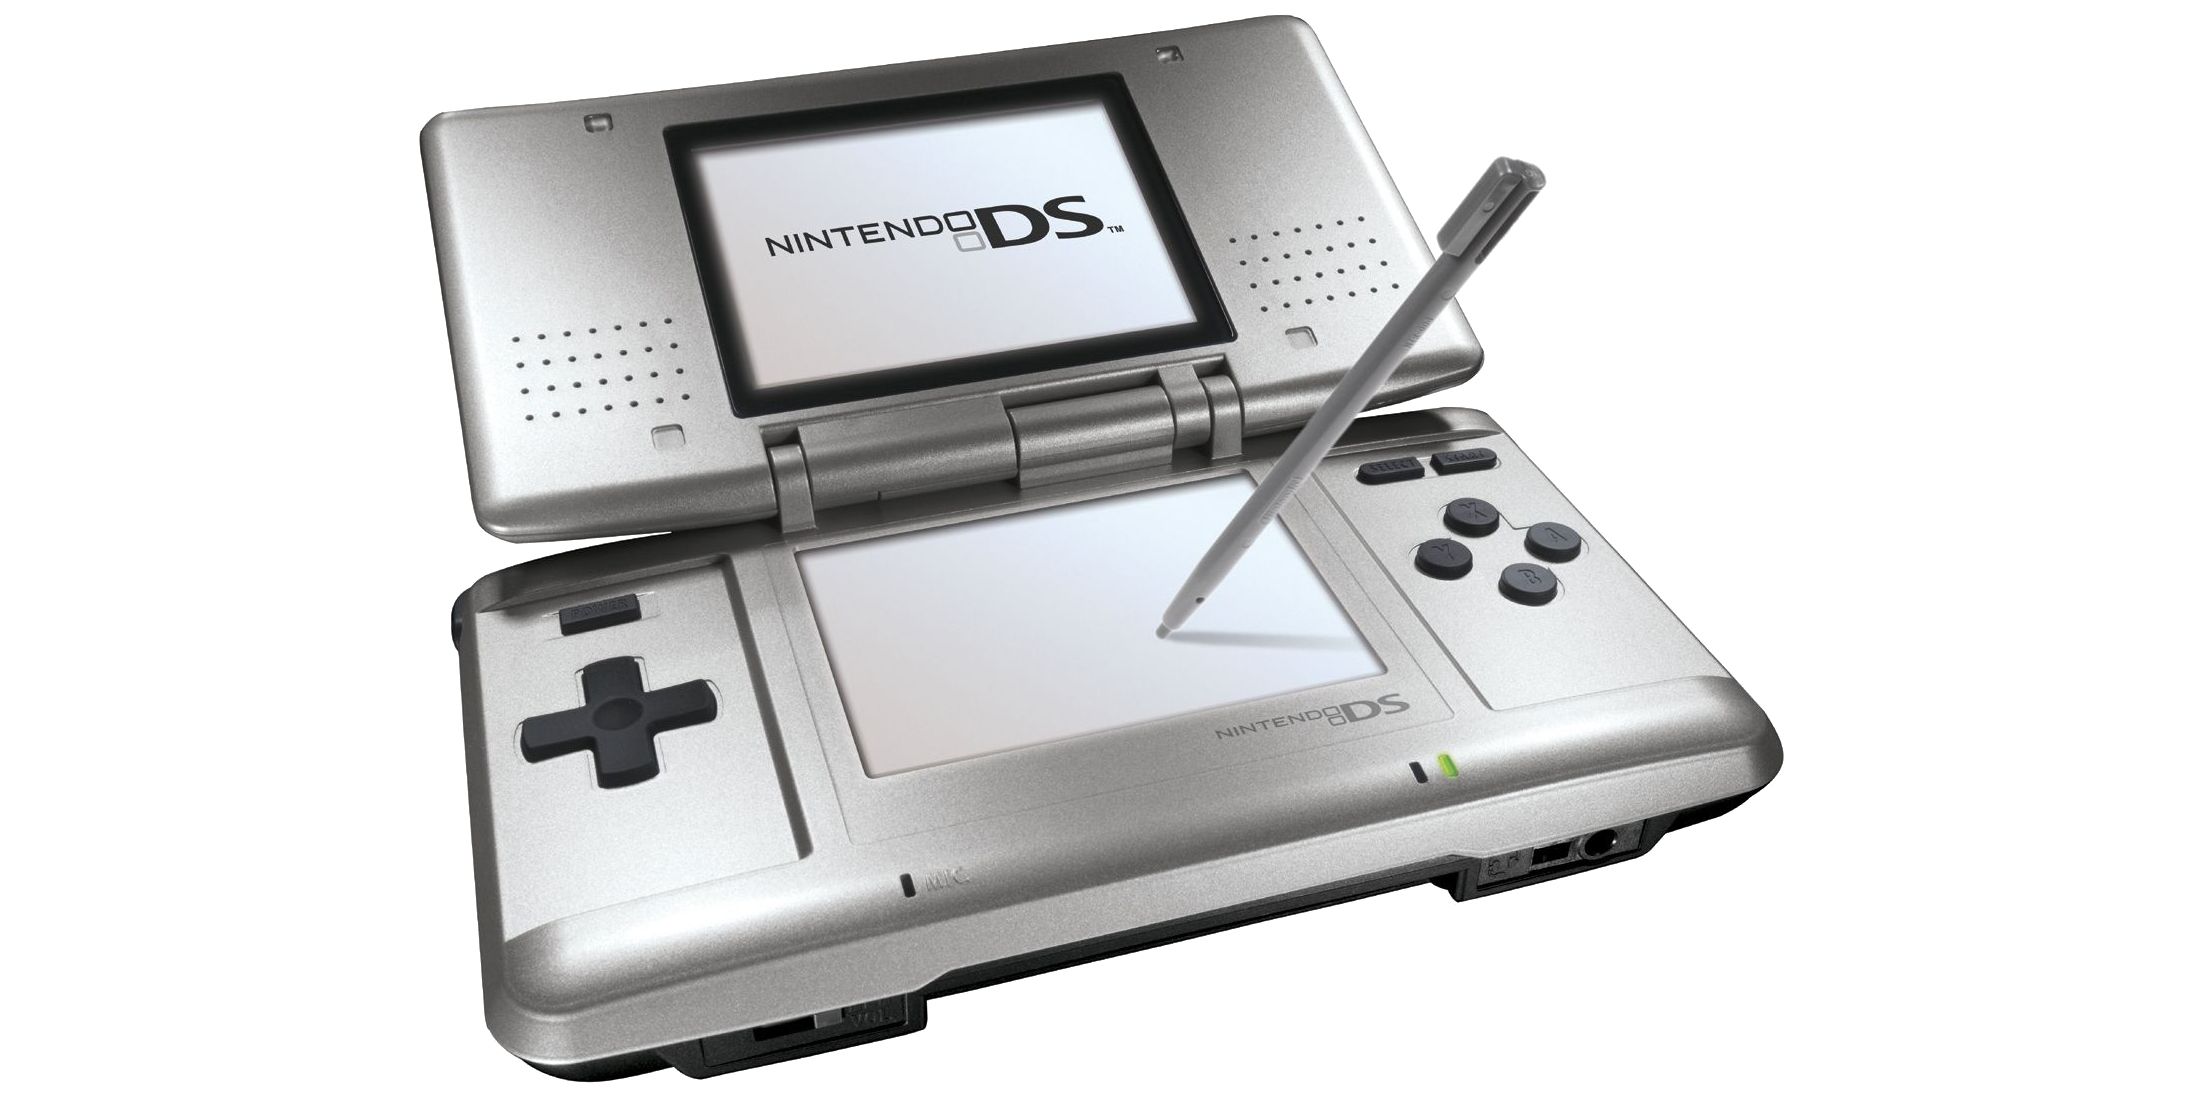 A photo showing the Nintendo DS